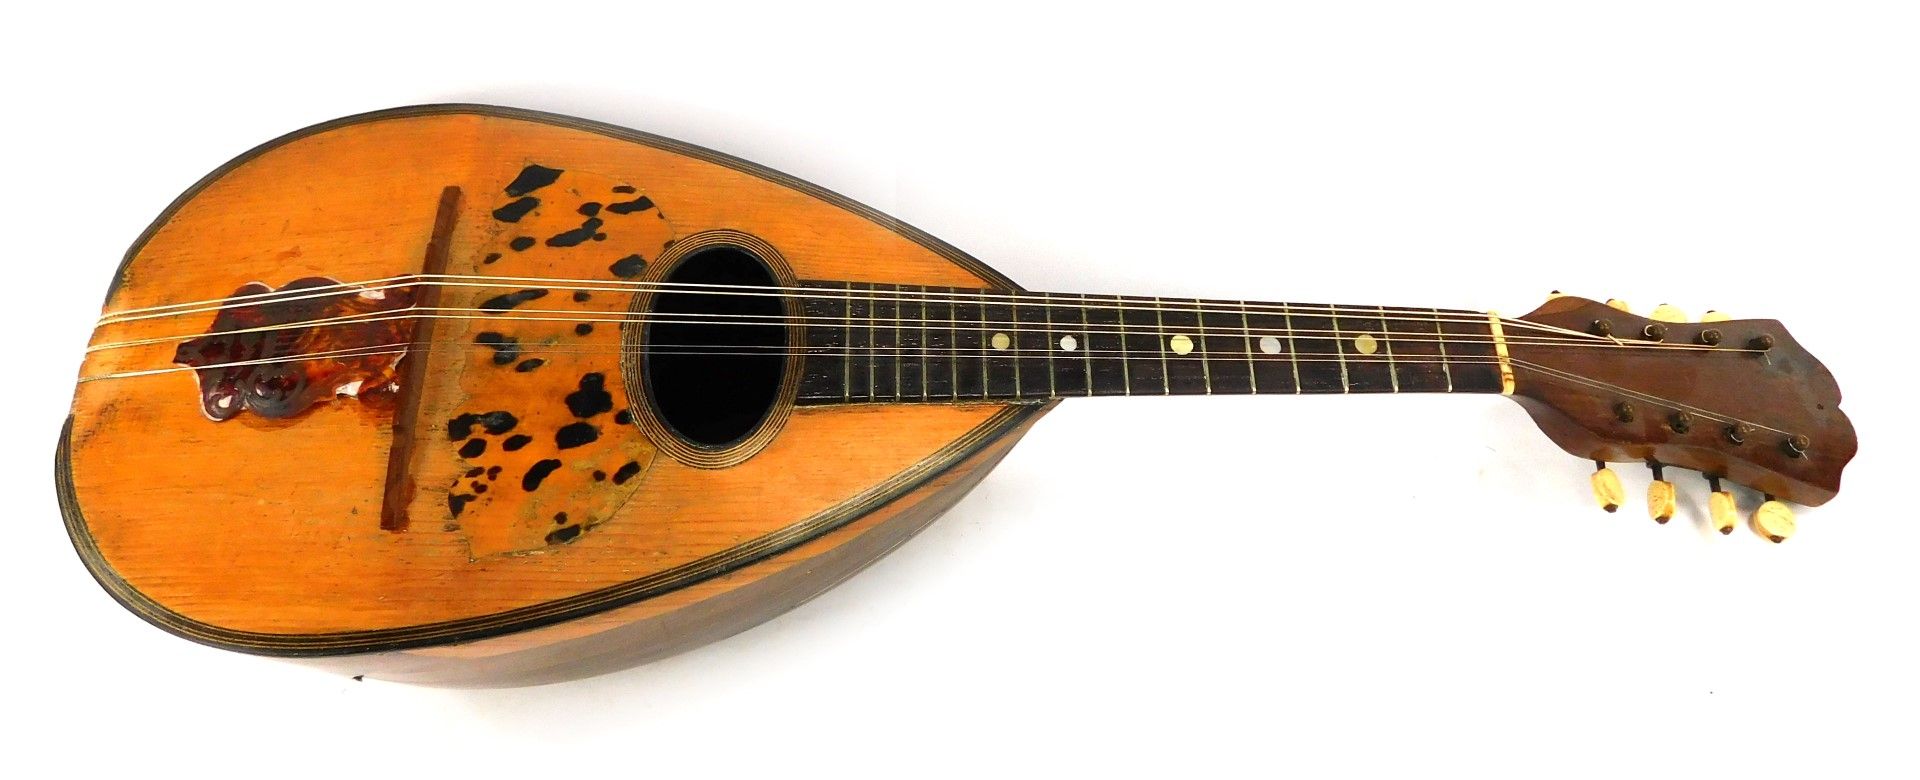 A Neopolitan mandolin, with tortoiseshell applied detail, with an ebonised stem and bone tuning pins